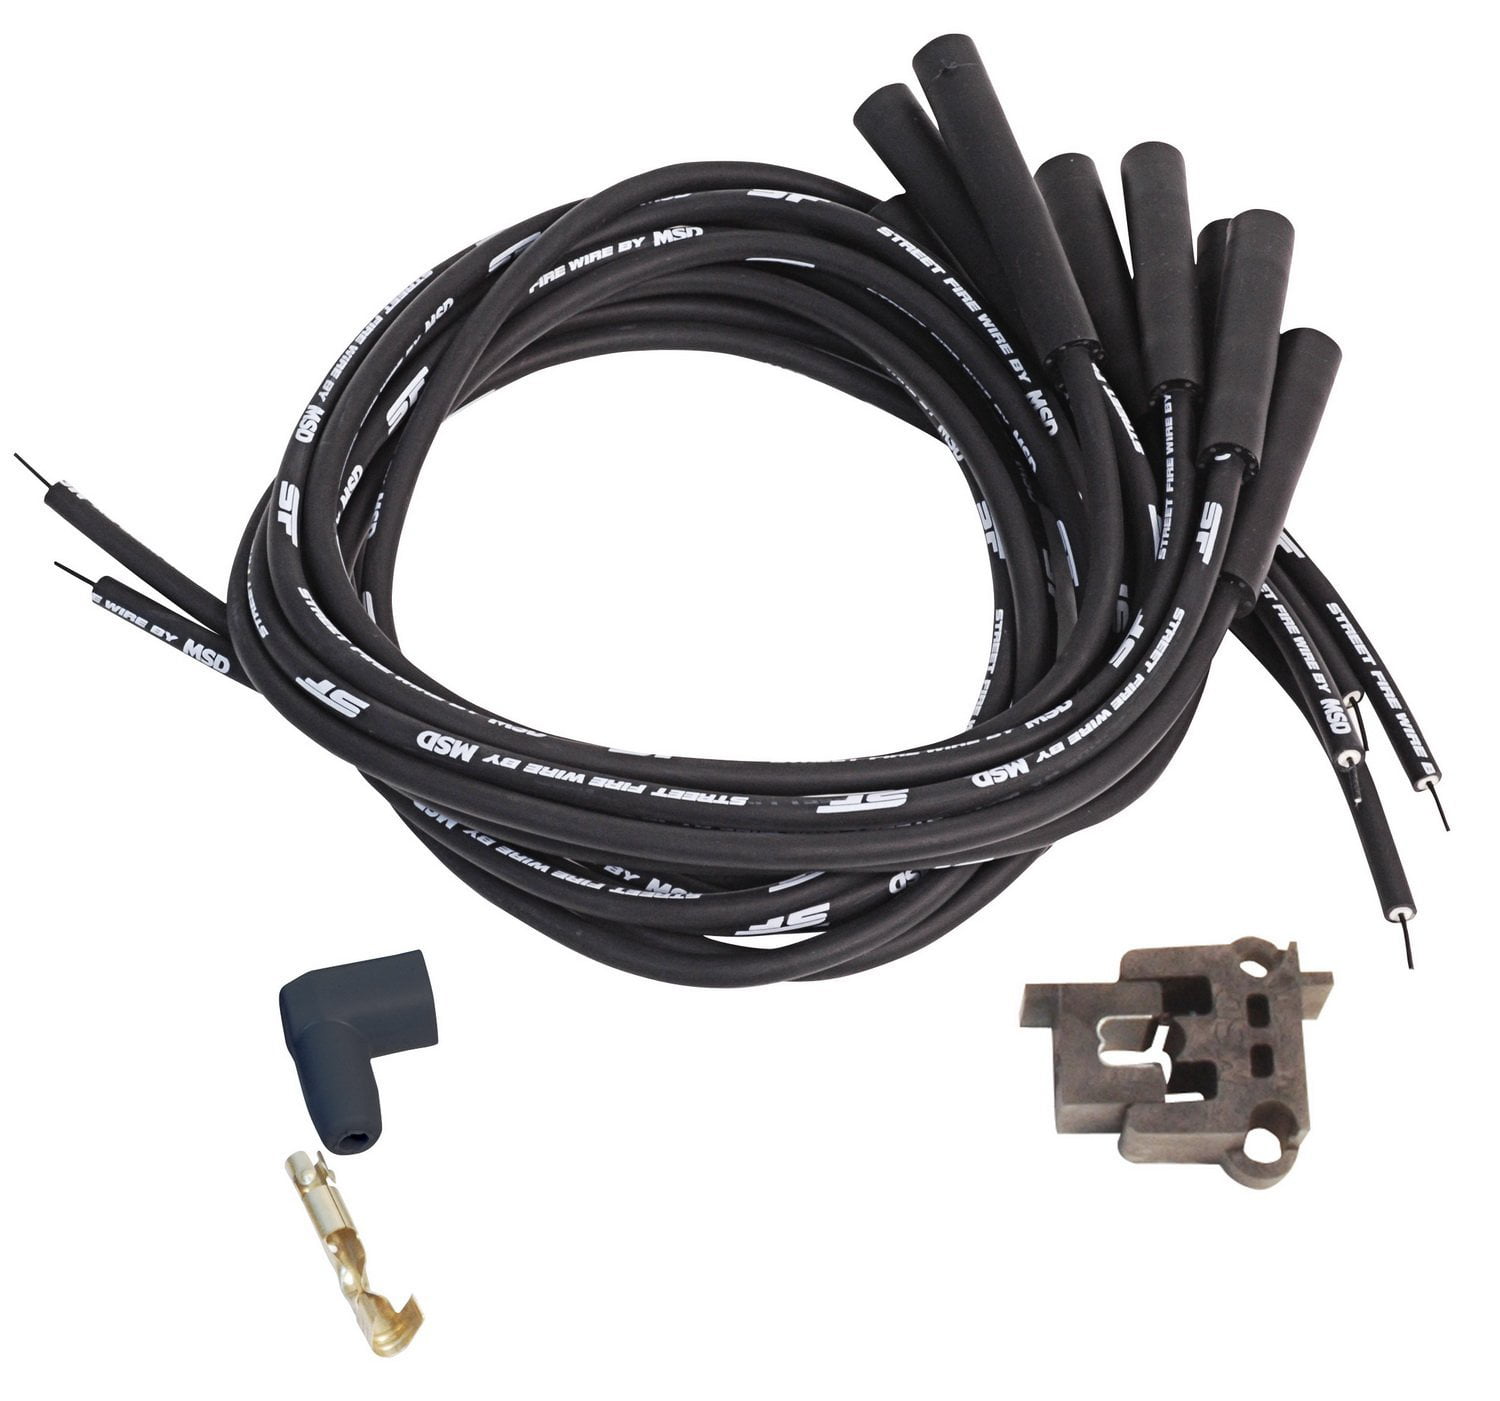 8 Cylinder Kit DEI Heat Protective Black Protect-A-Wire For Ignition HT Leads 